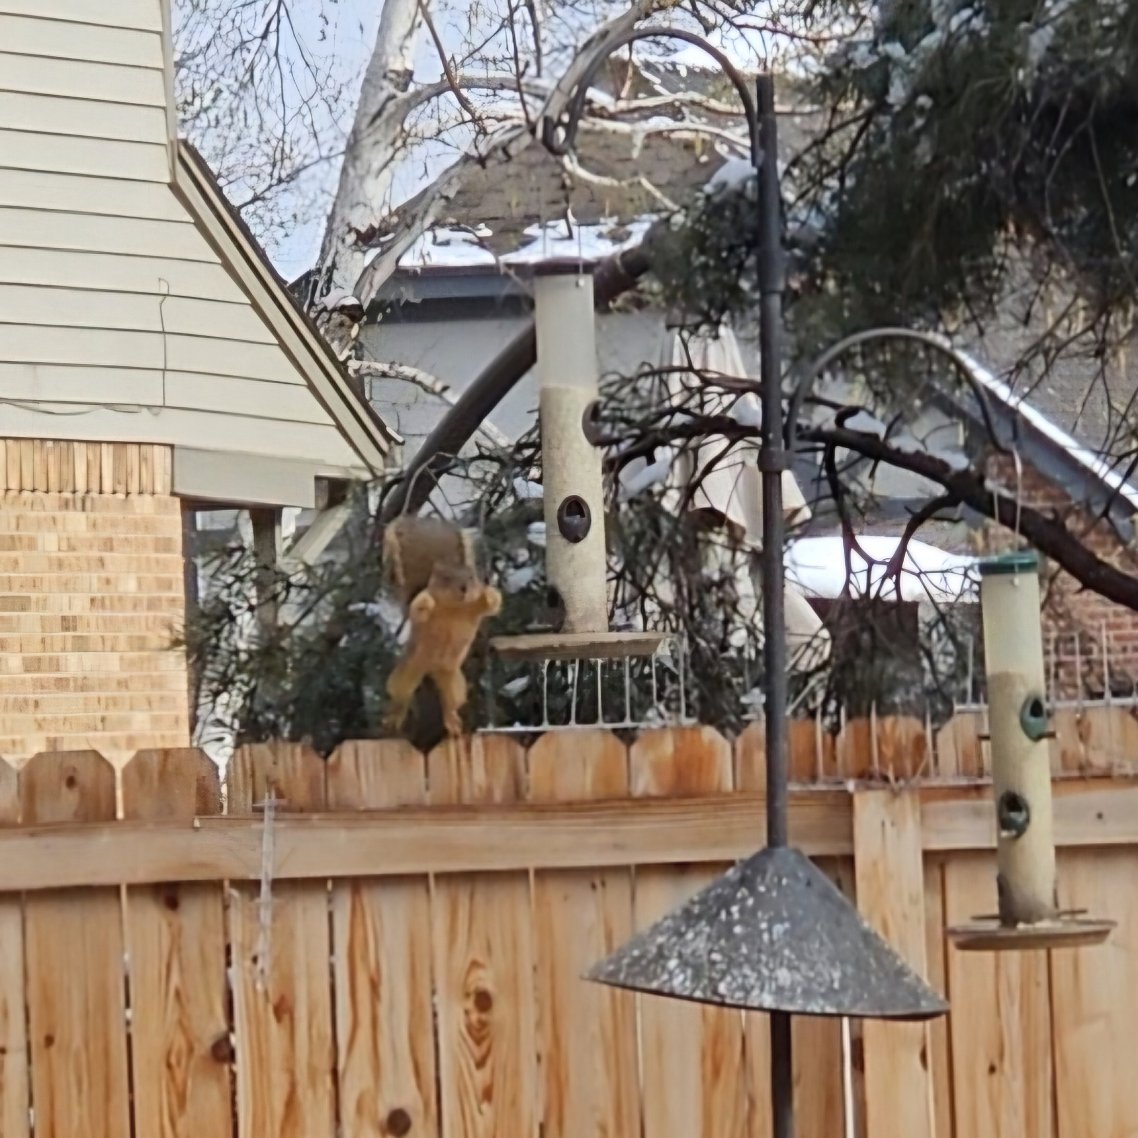 Yes, he made it to the feeder 7 feet from the fence.